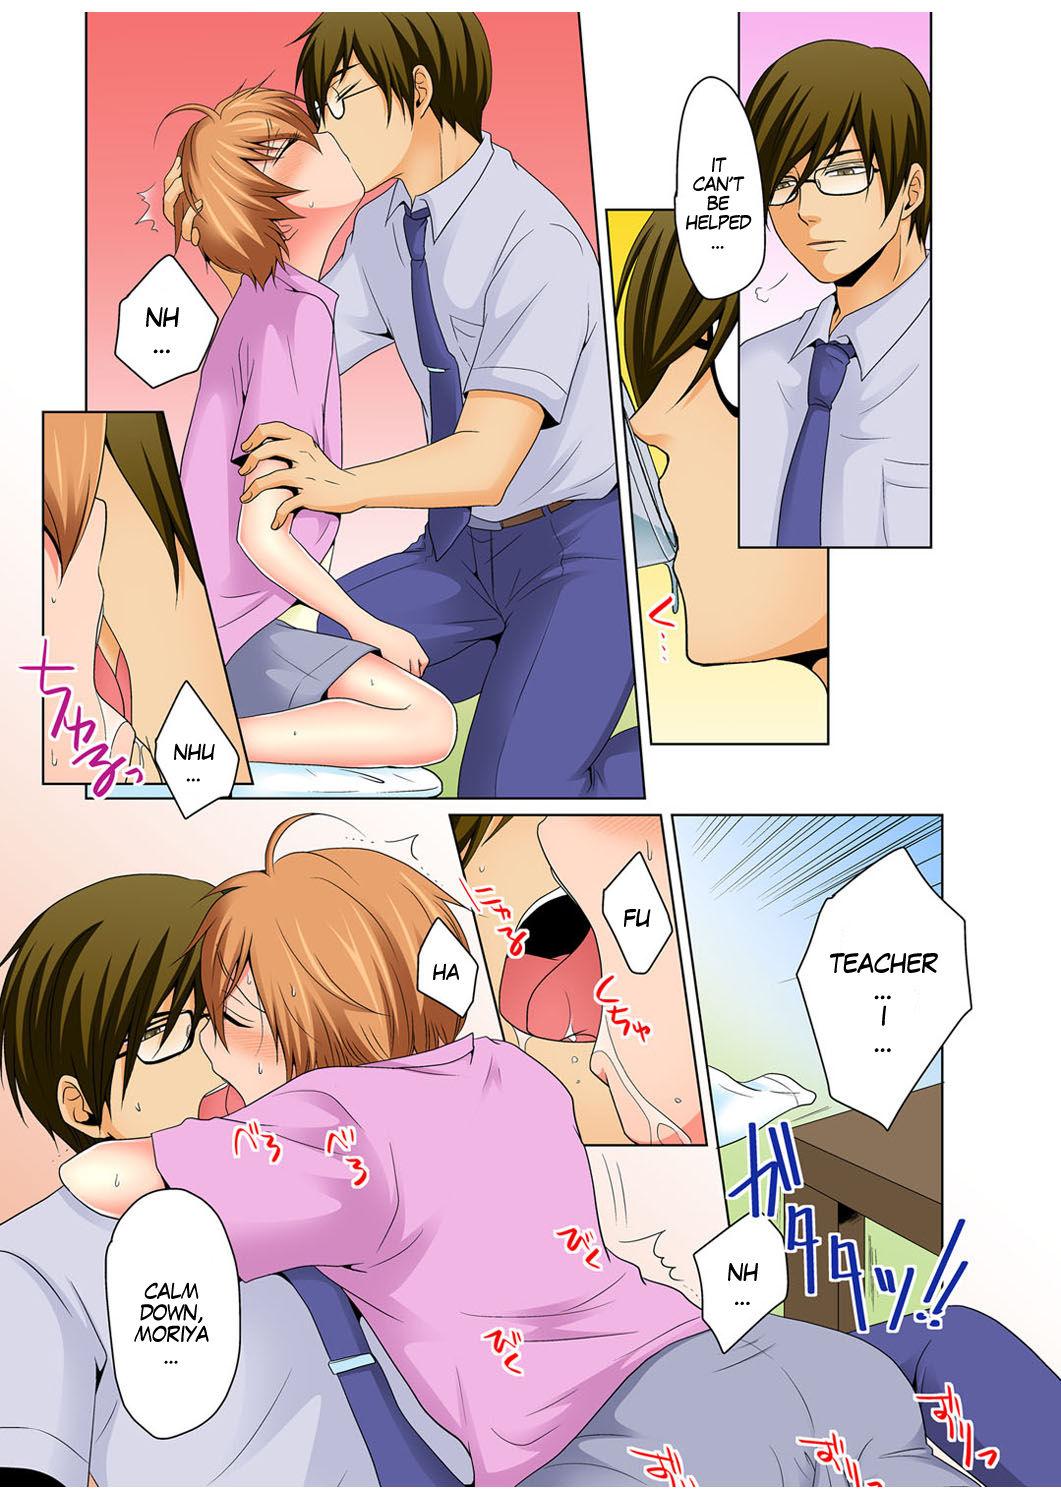 Leaked Nyotaika de Ecchi Kenshin!? Mirudake tte Itta no ni... 3 | Gender Bender Into Sexy Medical Examination! You said that you were only going to look... 3 Femdom Porn - Page 3